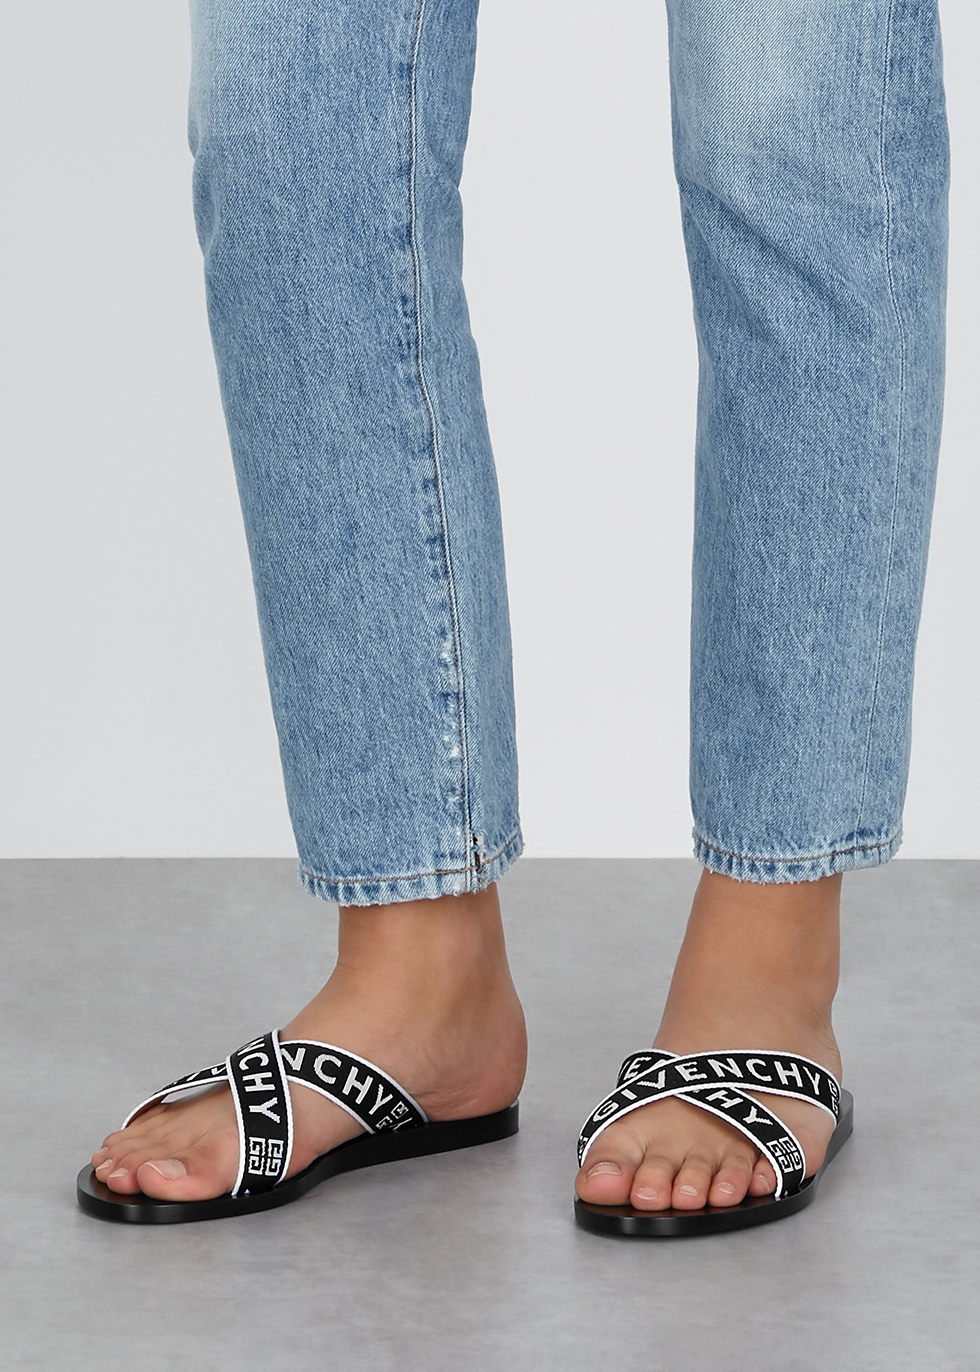 givenchy womens sandals